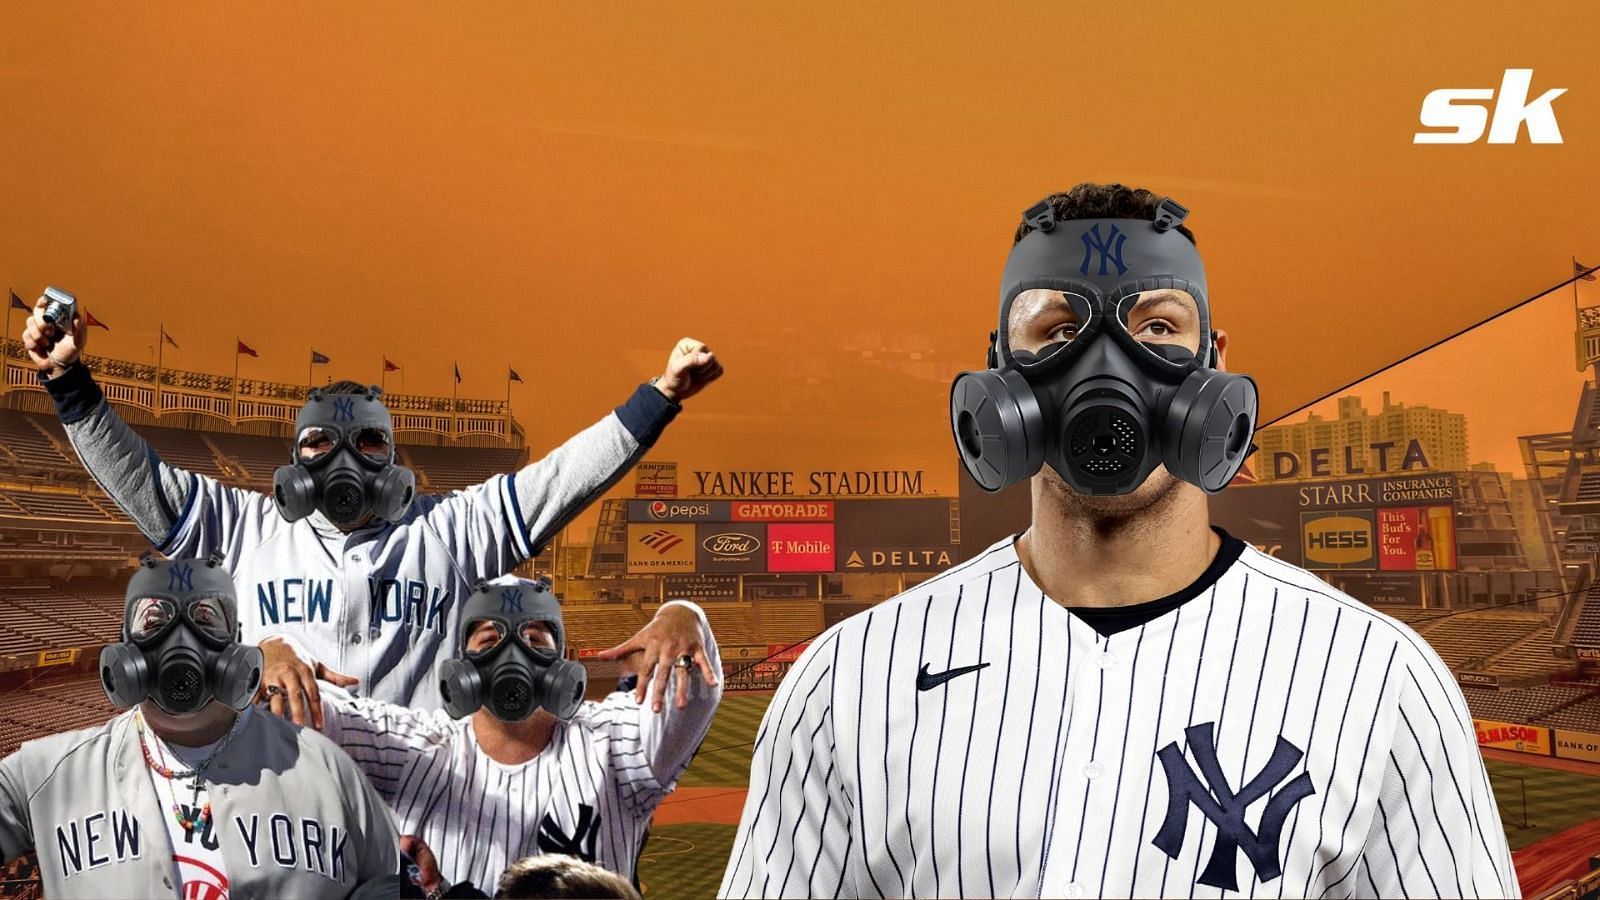 Smoke engulfes the Bronx during a New York Yankees game on June 6